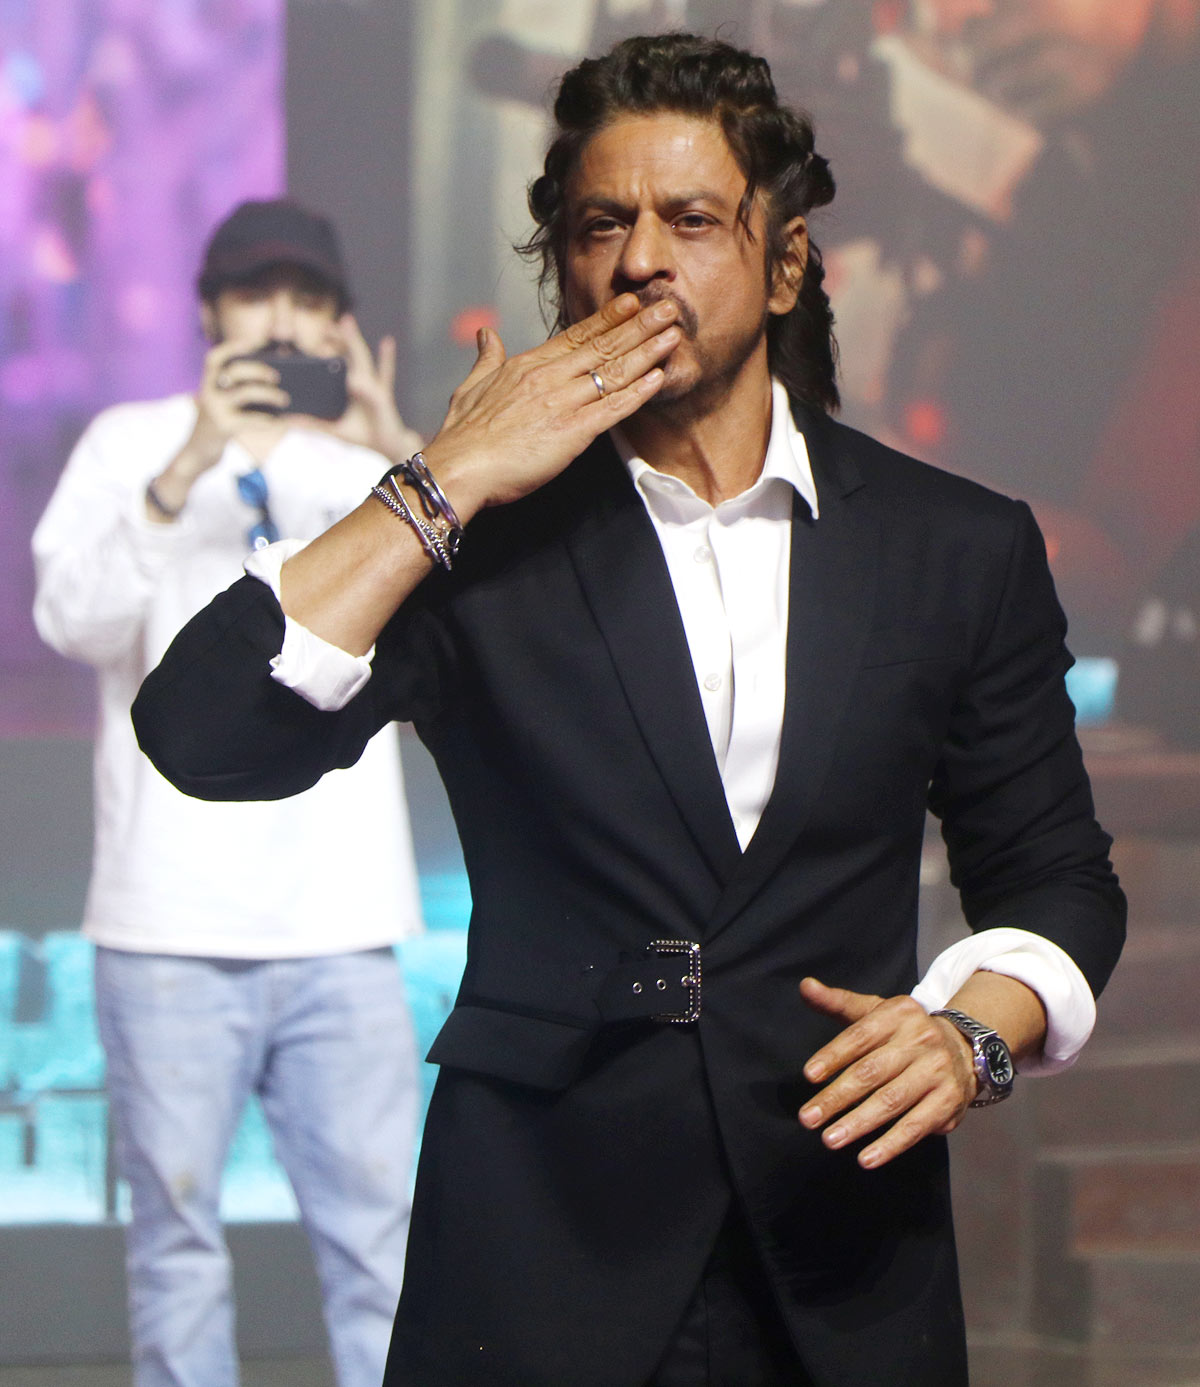 Pathaan` star Shah Rukh Khan shakes hands, blows flying kisses to fans in  Delhi